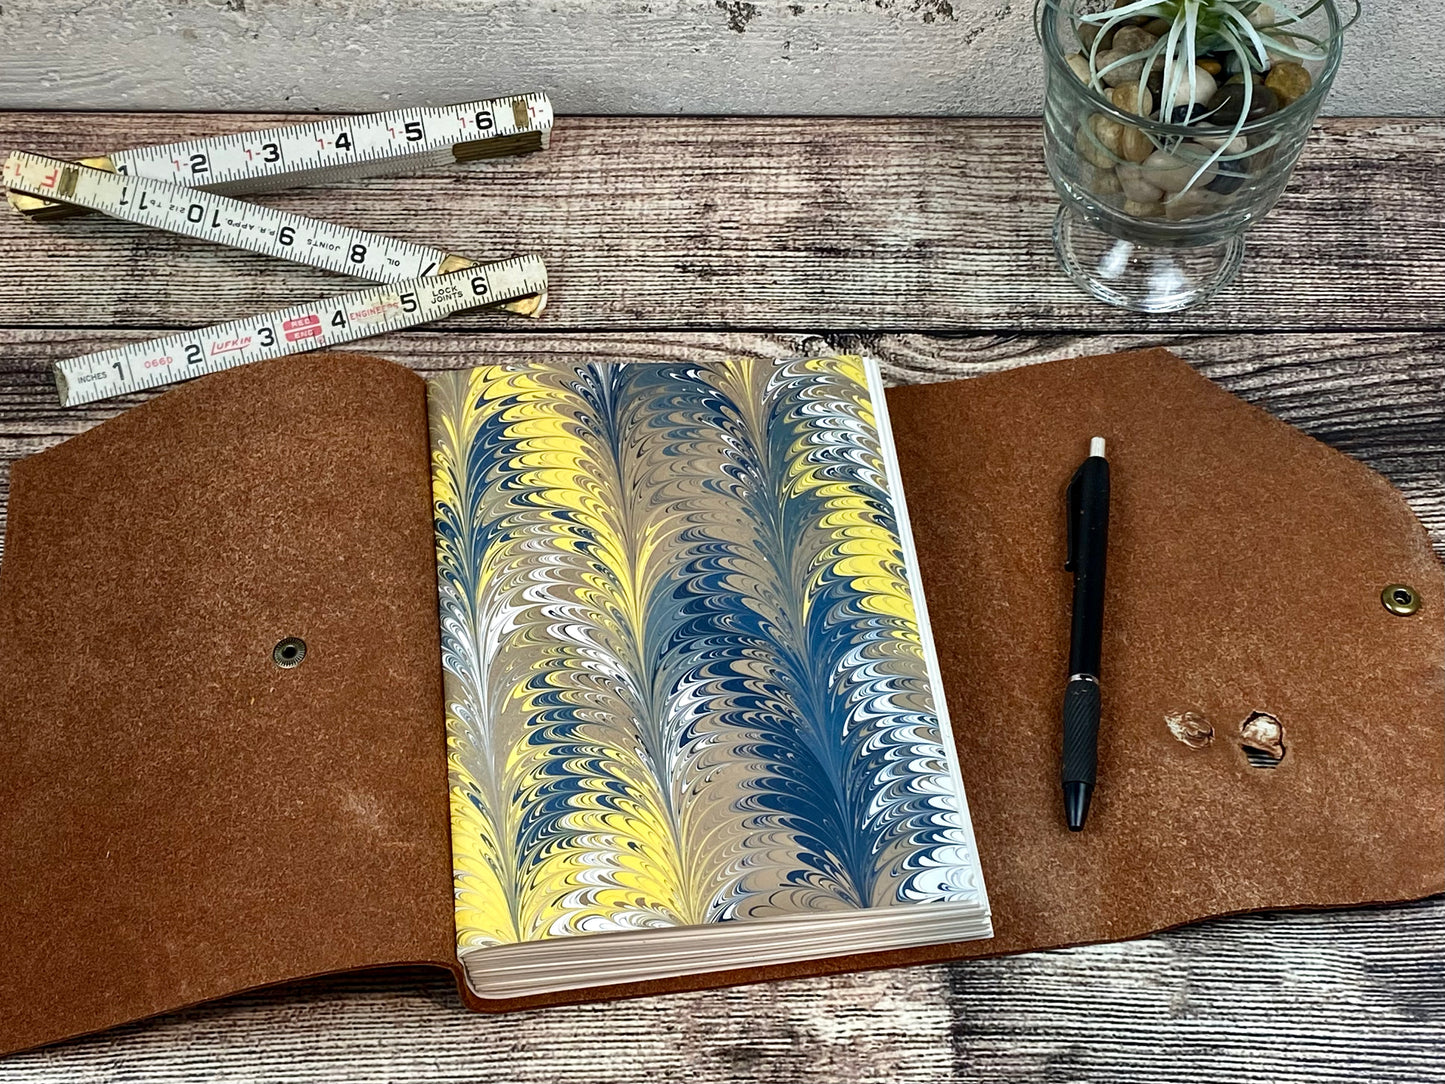 6x8 Leather Journal -  Creekside